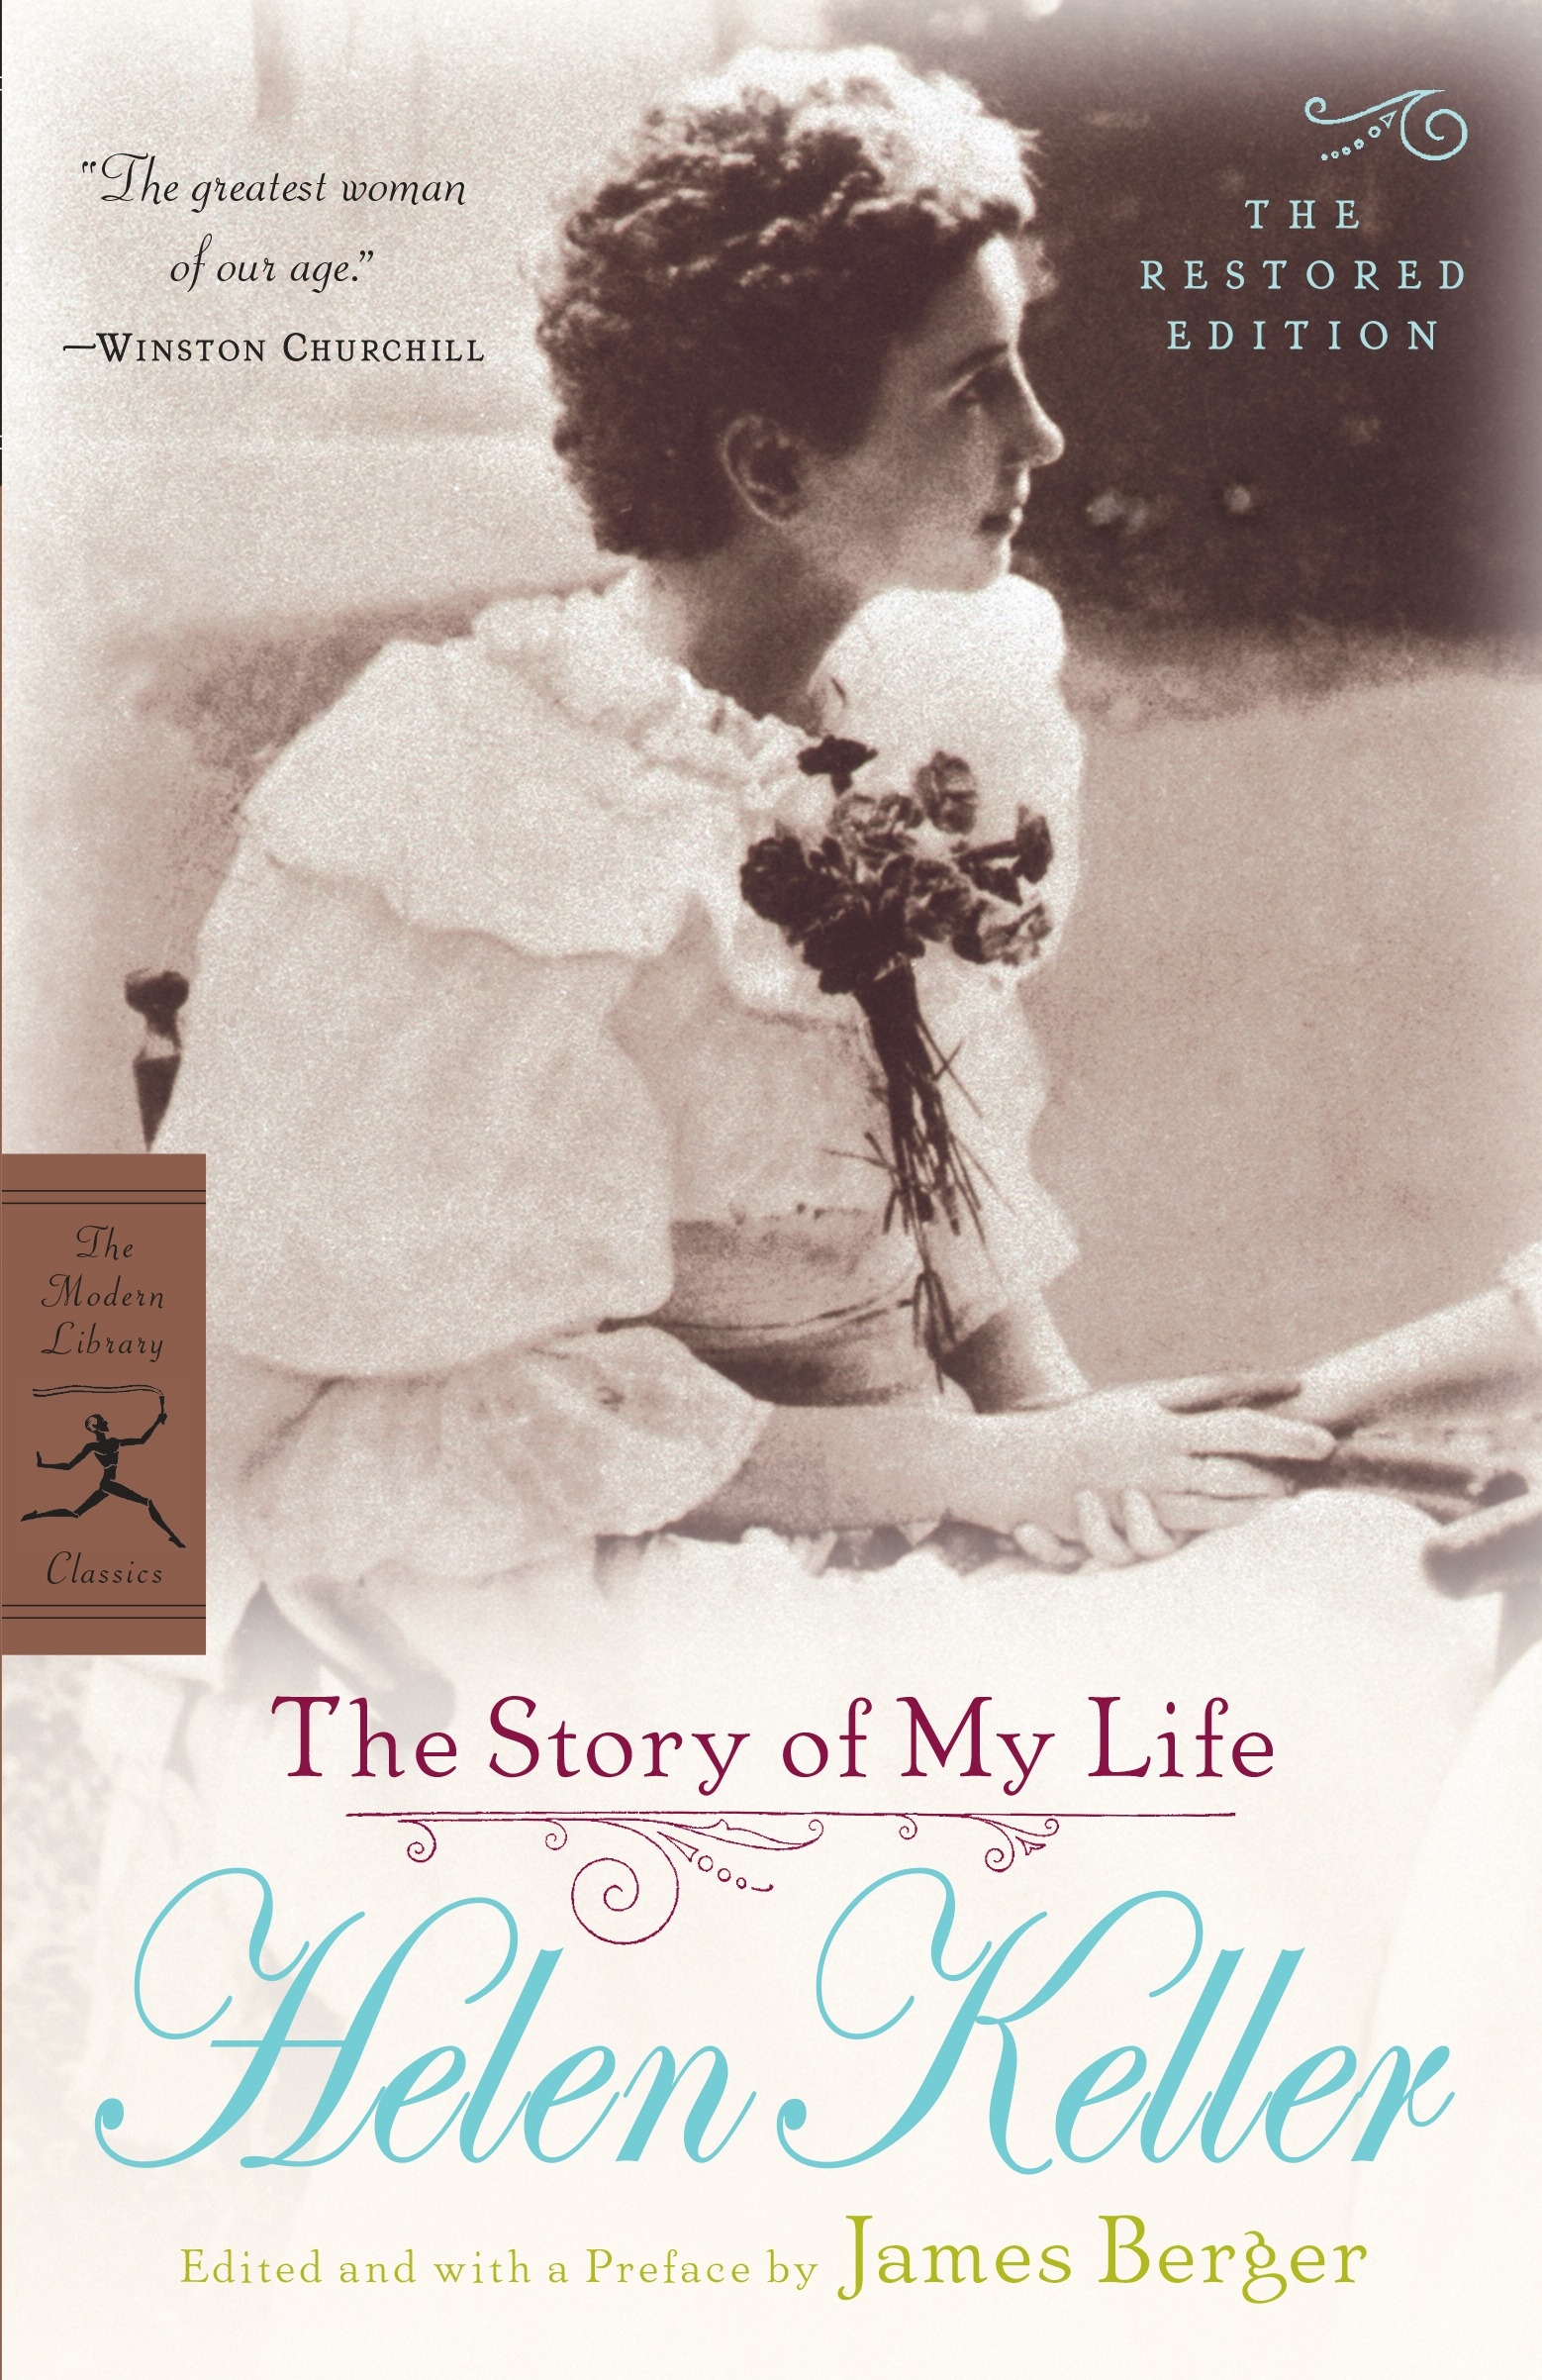 the story of my life by helen keller autobiography